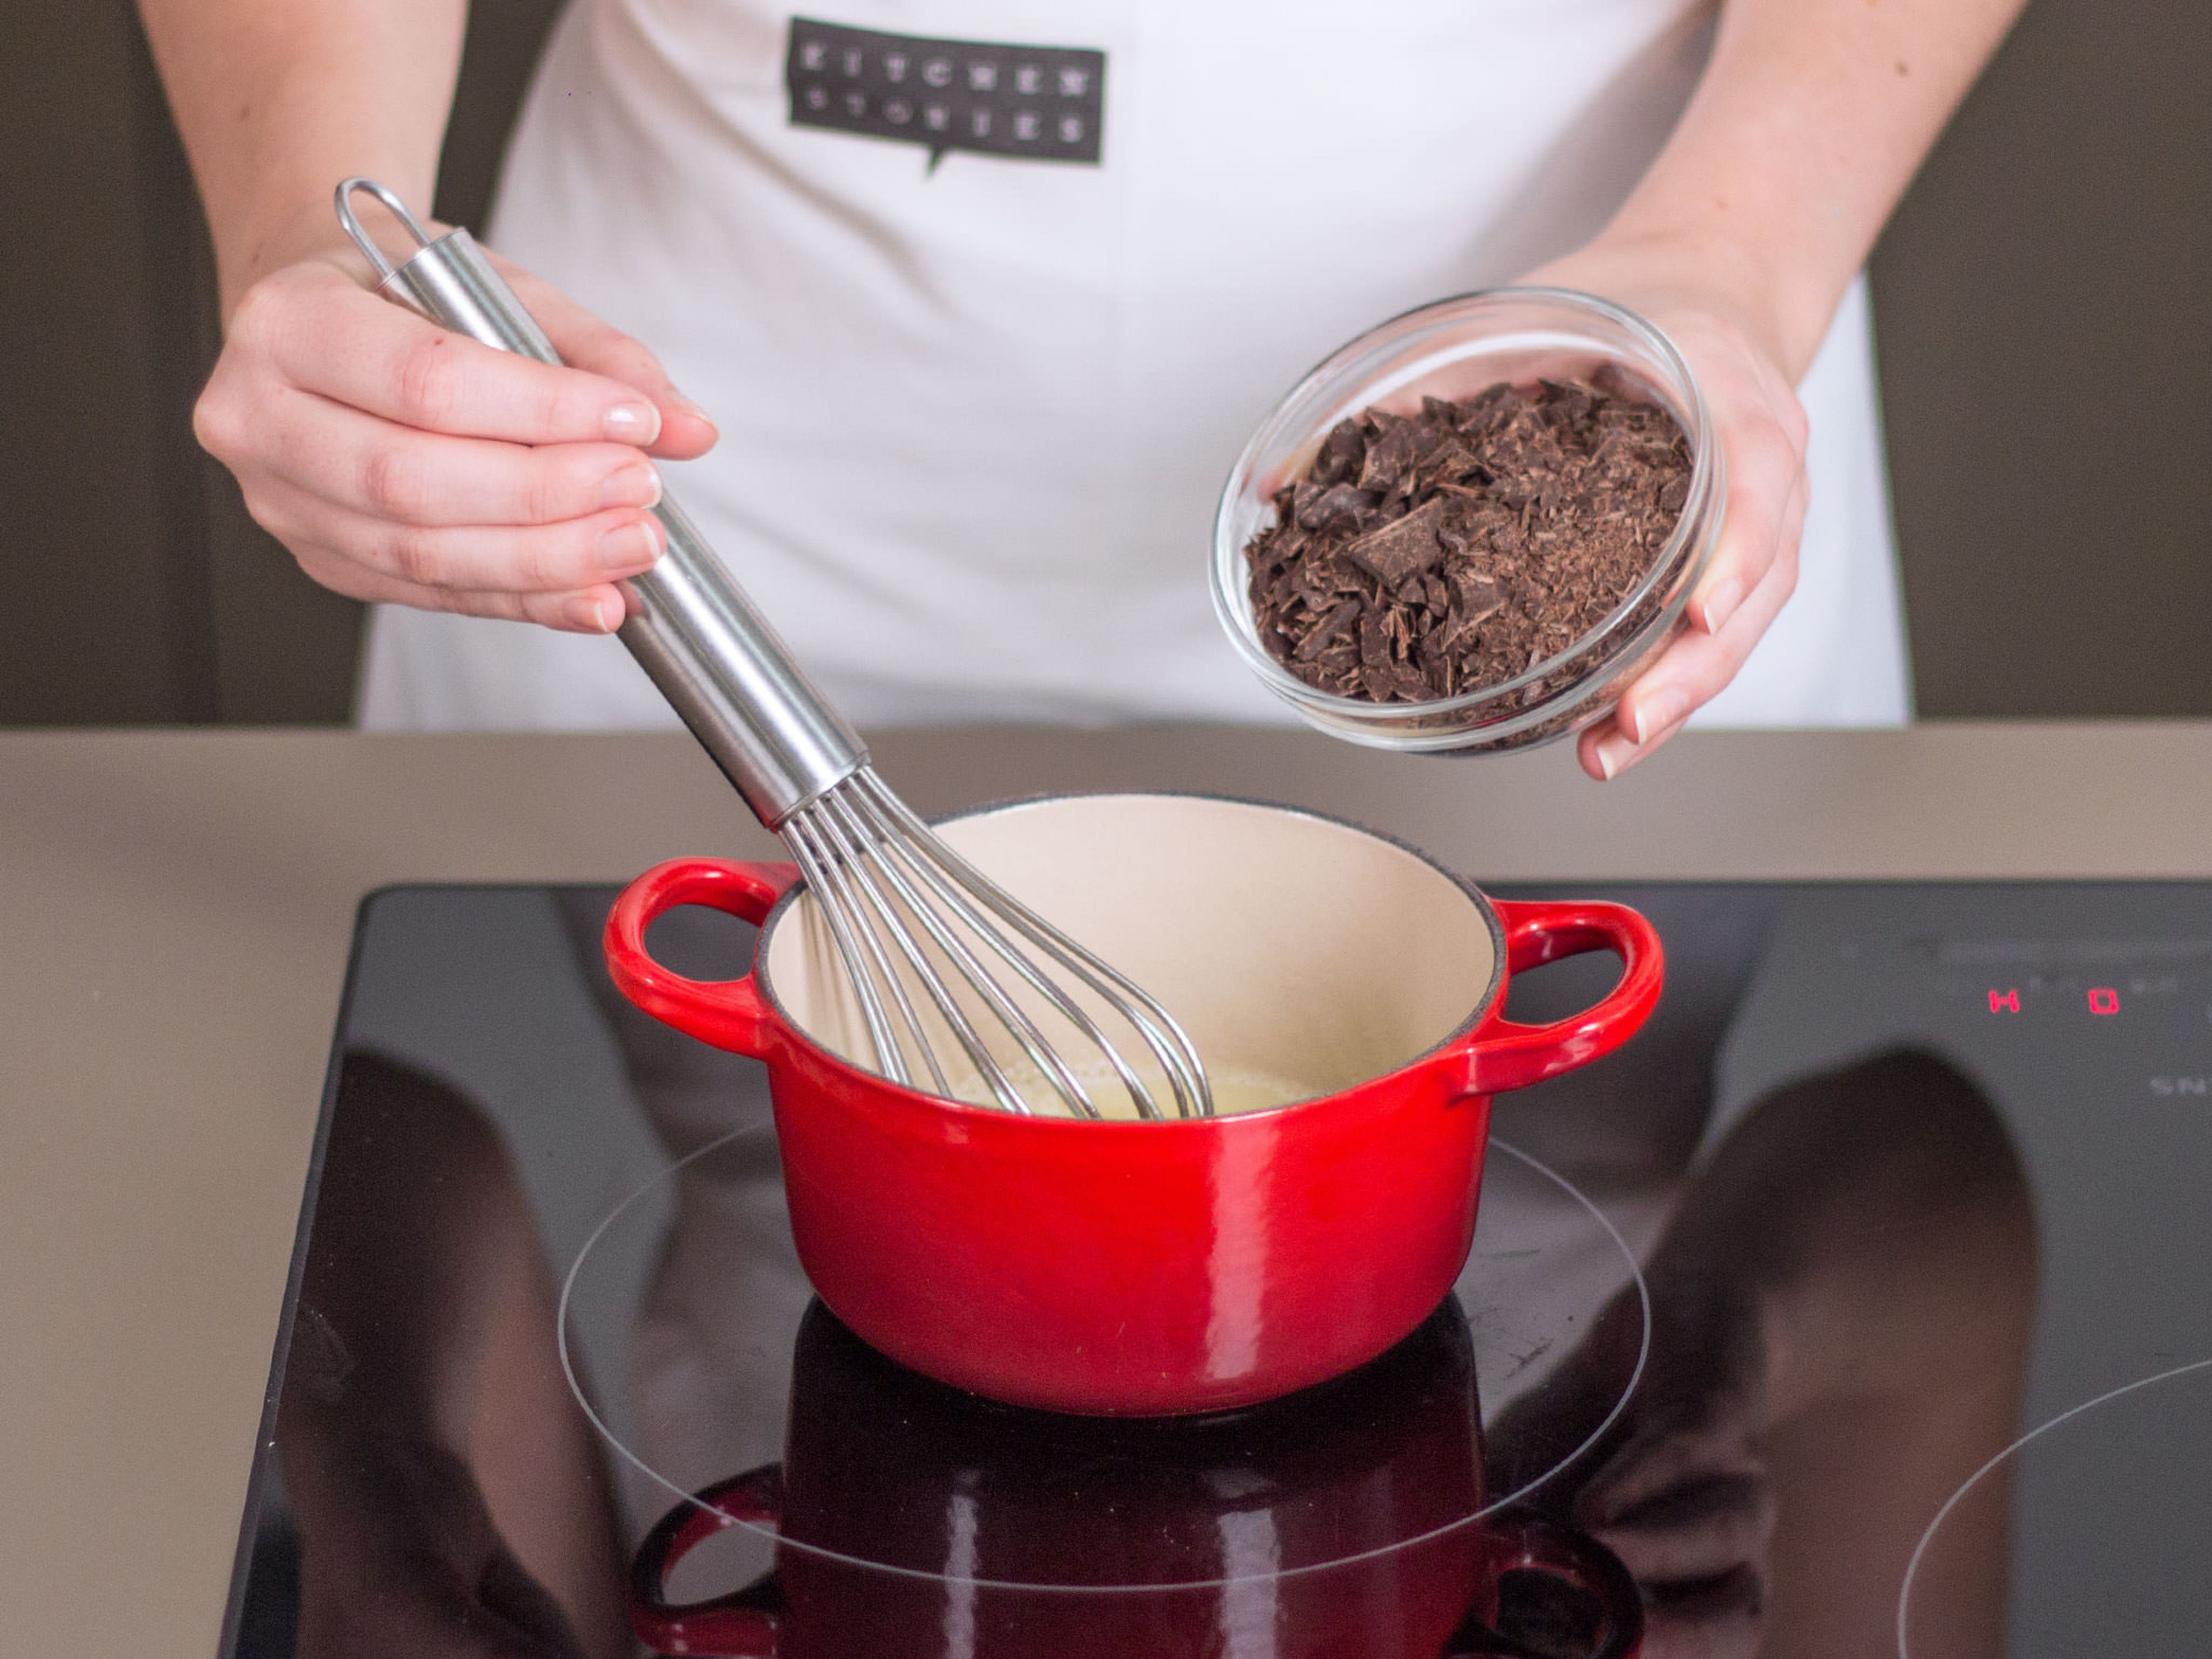 Roughly chop chocolate. Add cream, sugar, and vanilla bean seeds to a small saucepan and cook over medium heat for approx. 3 – 5 min. Then add in chocolate and stir thoroughly until dissolved.